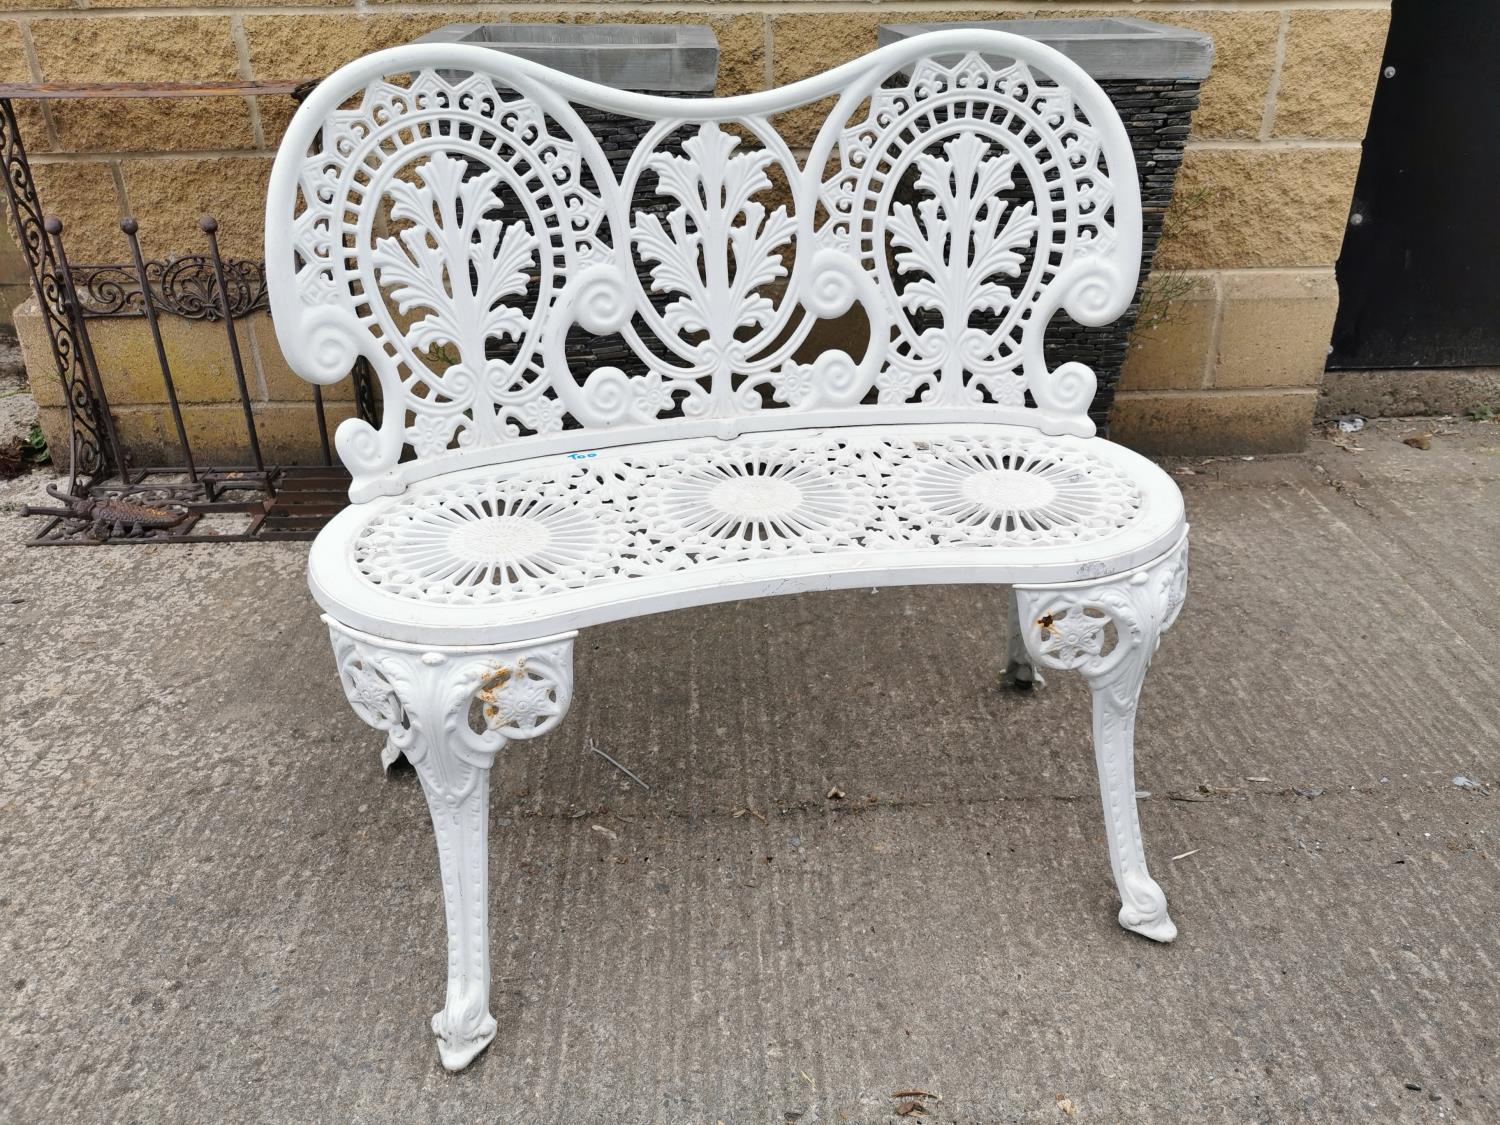 Decorative cast alloy two seater garden bench.